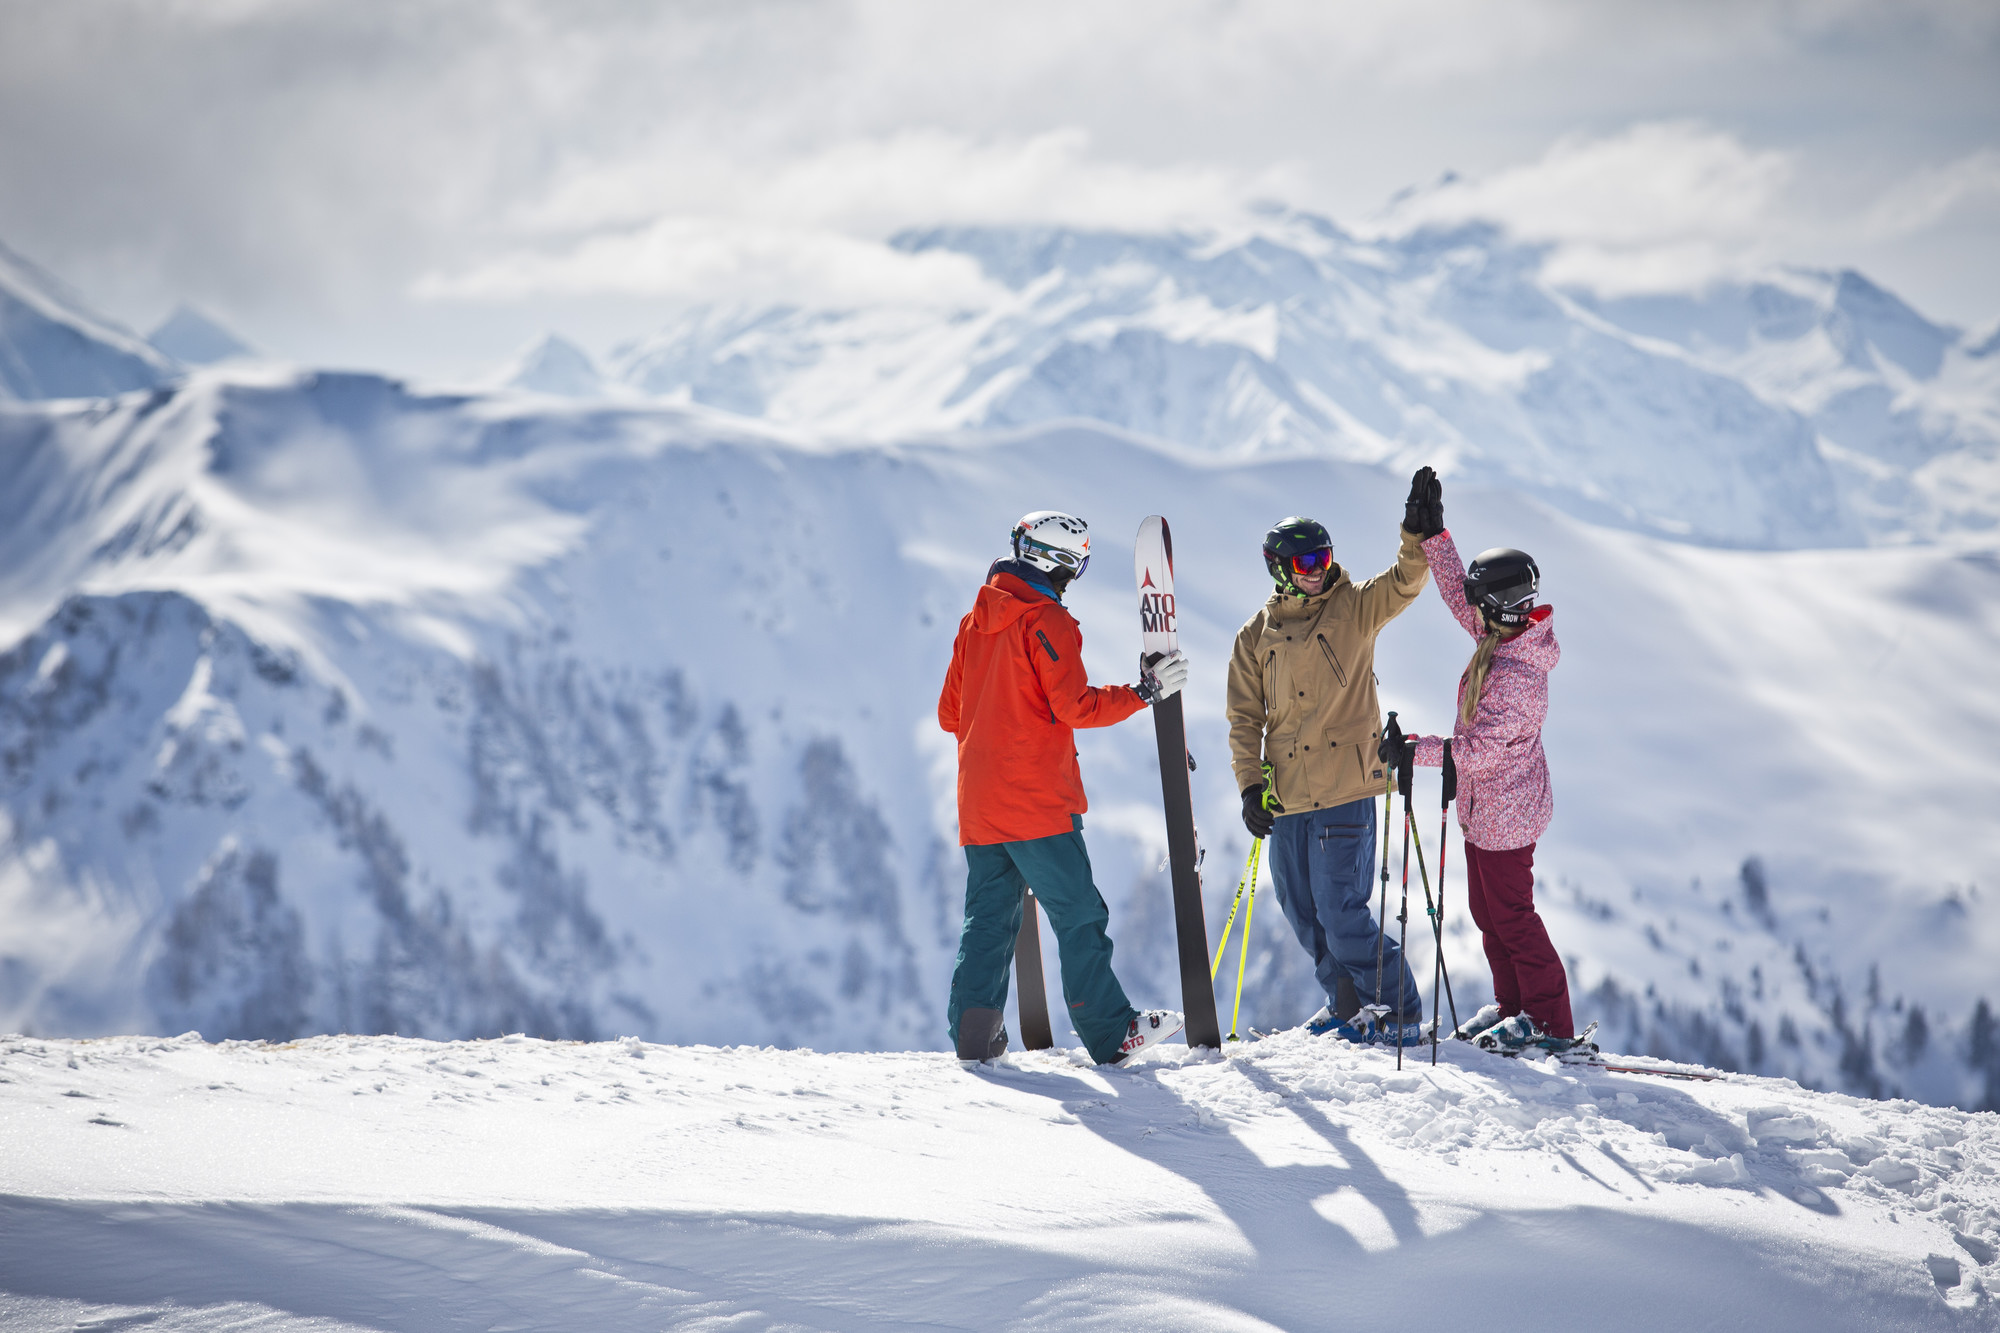 perfect skiing days are waiting!